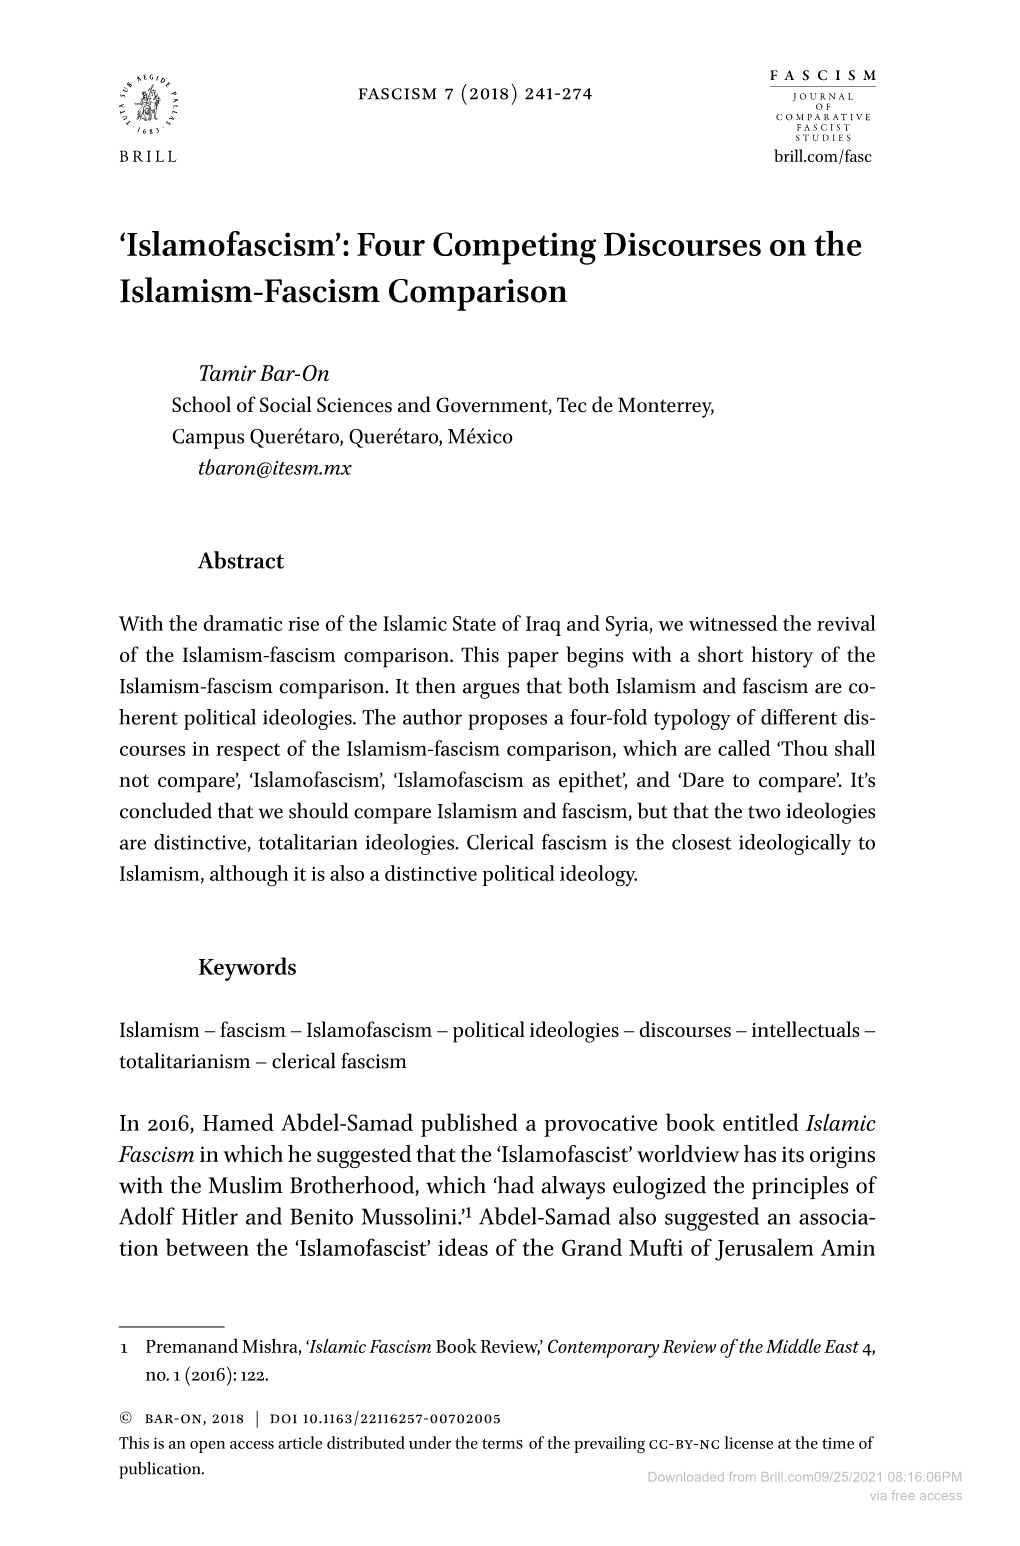 Four Competing Discourses on the Islamism-Fascism Comparison